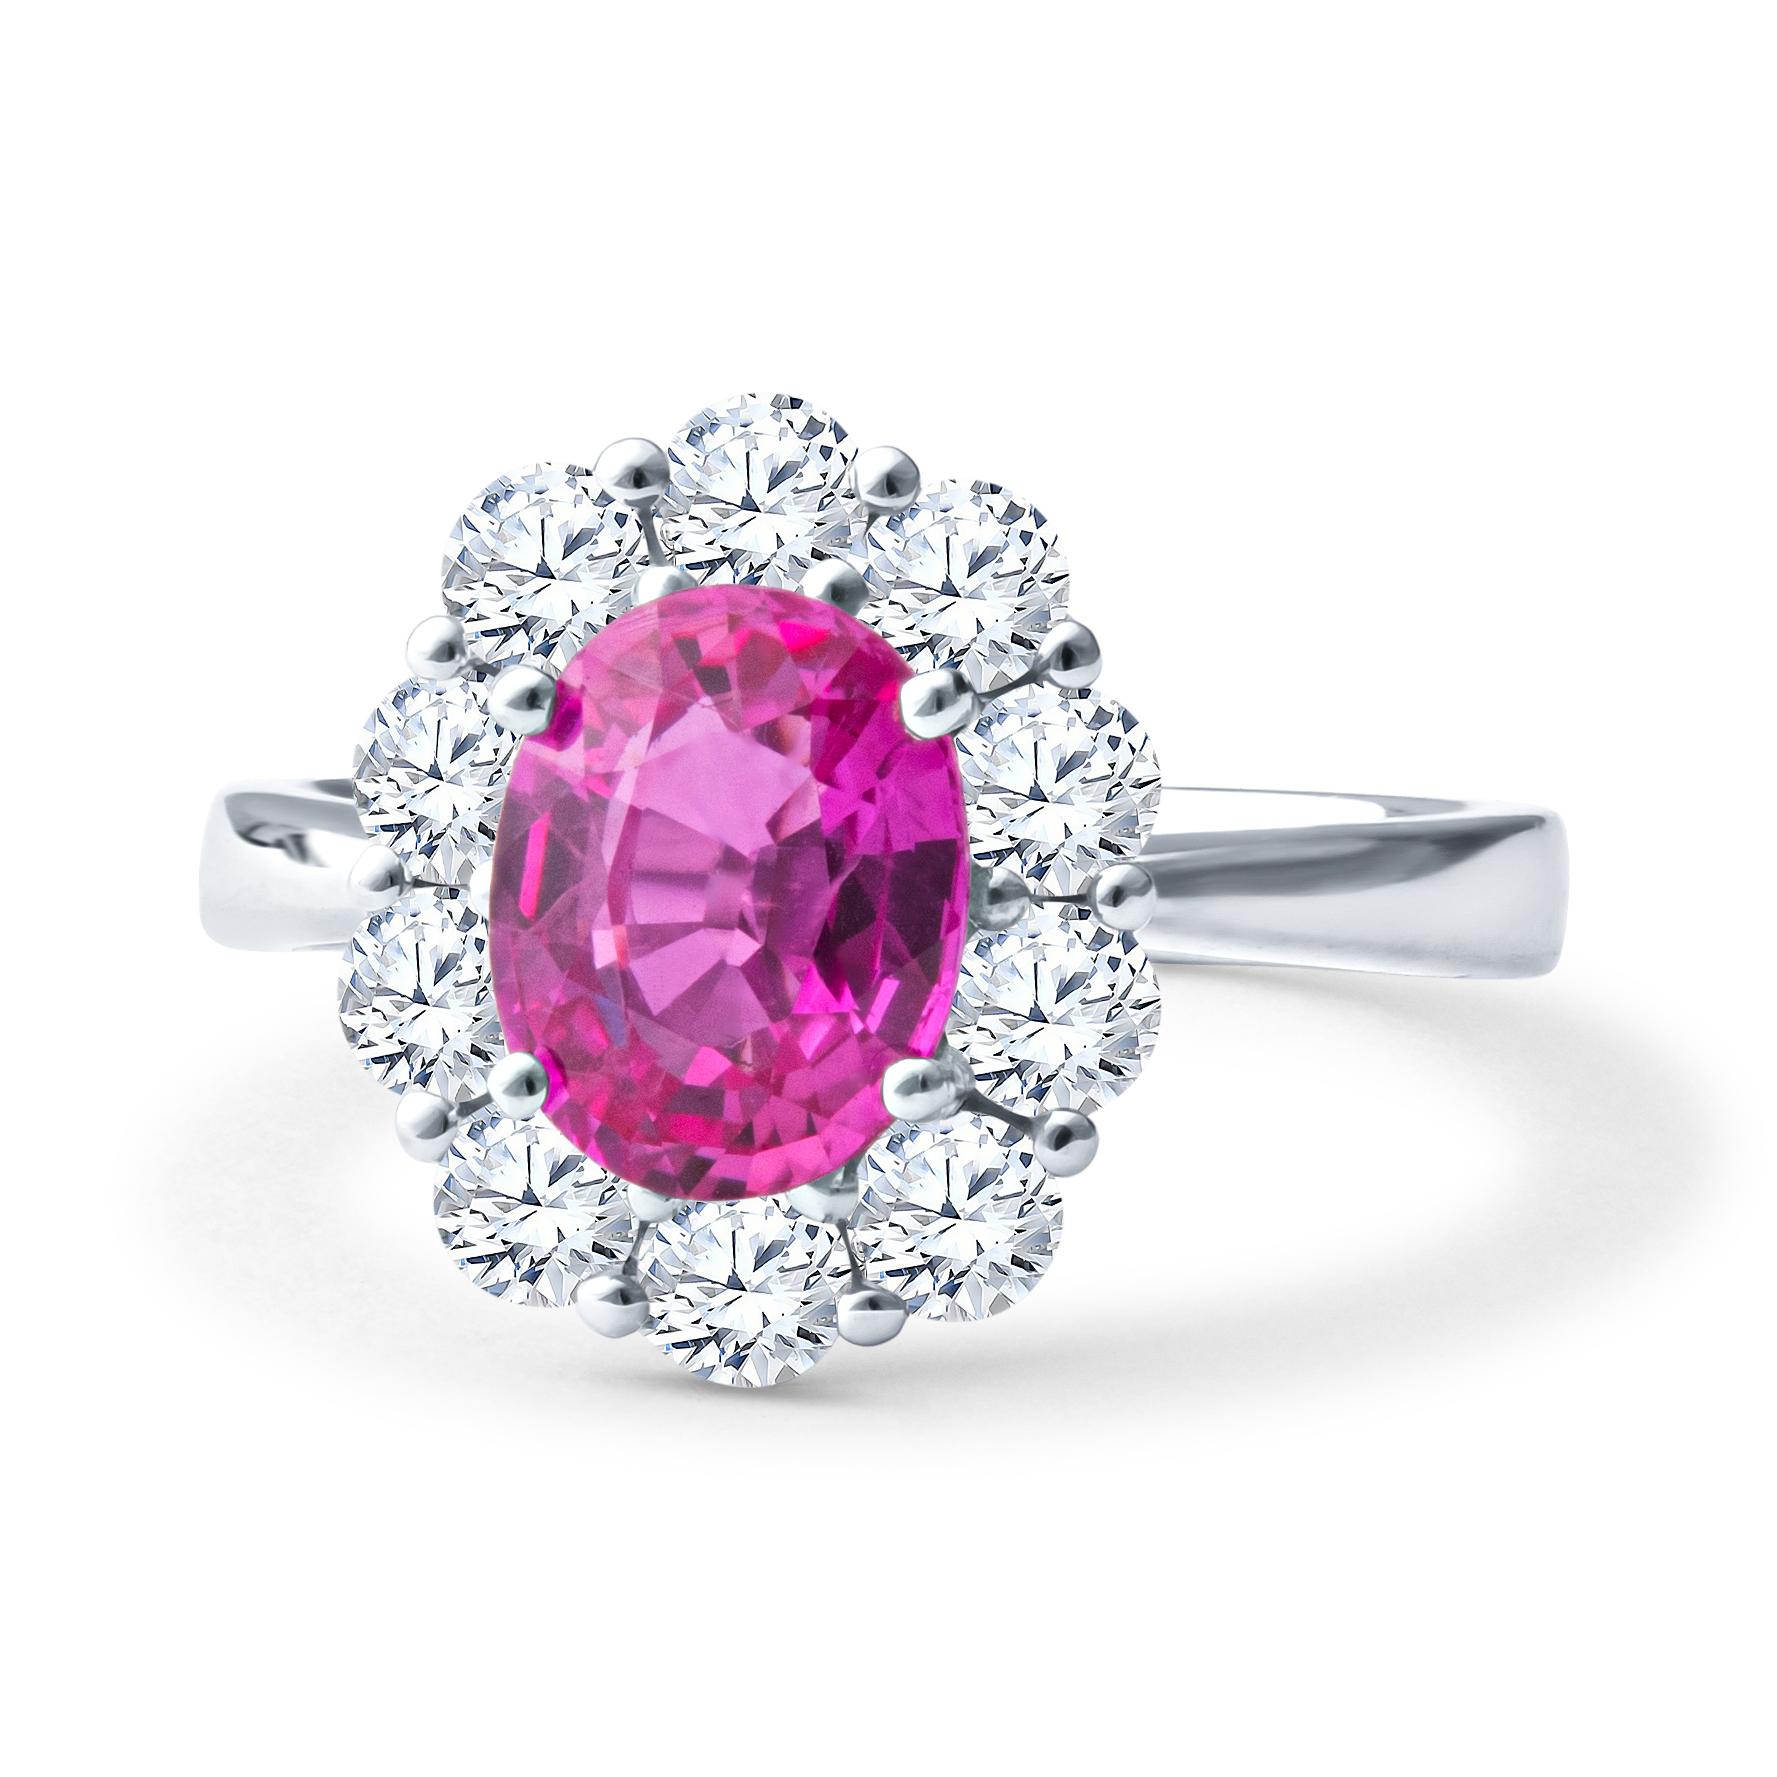 This gorgeous ring features a 2.20ct pink sapphire centerstone in an oval shape, with an intense saturation and an electric pink hue, surrounded by a 1.17ct total weight in round diamonds making a halo around the sapphire and forming a floral shape.